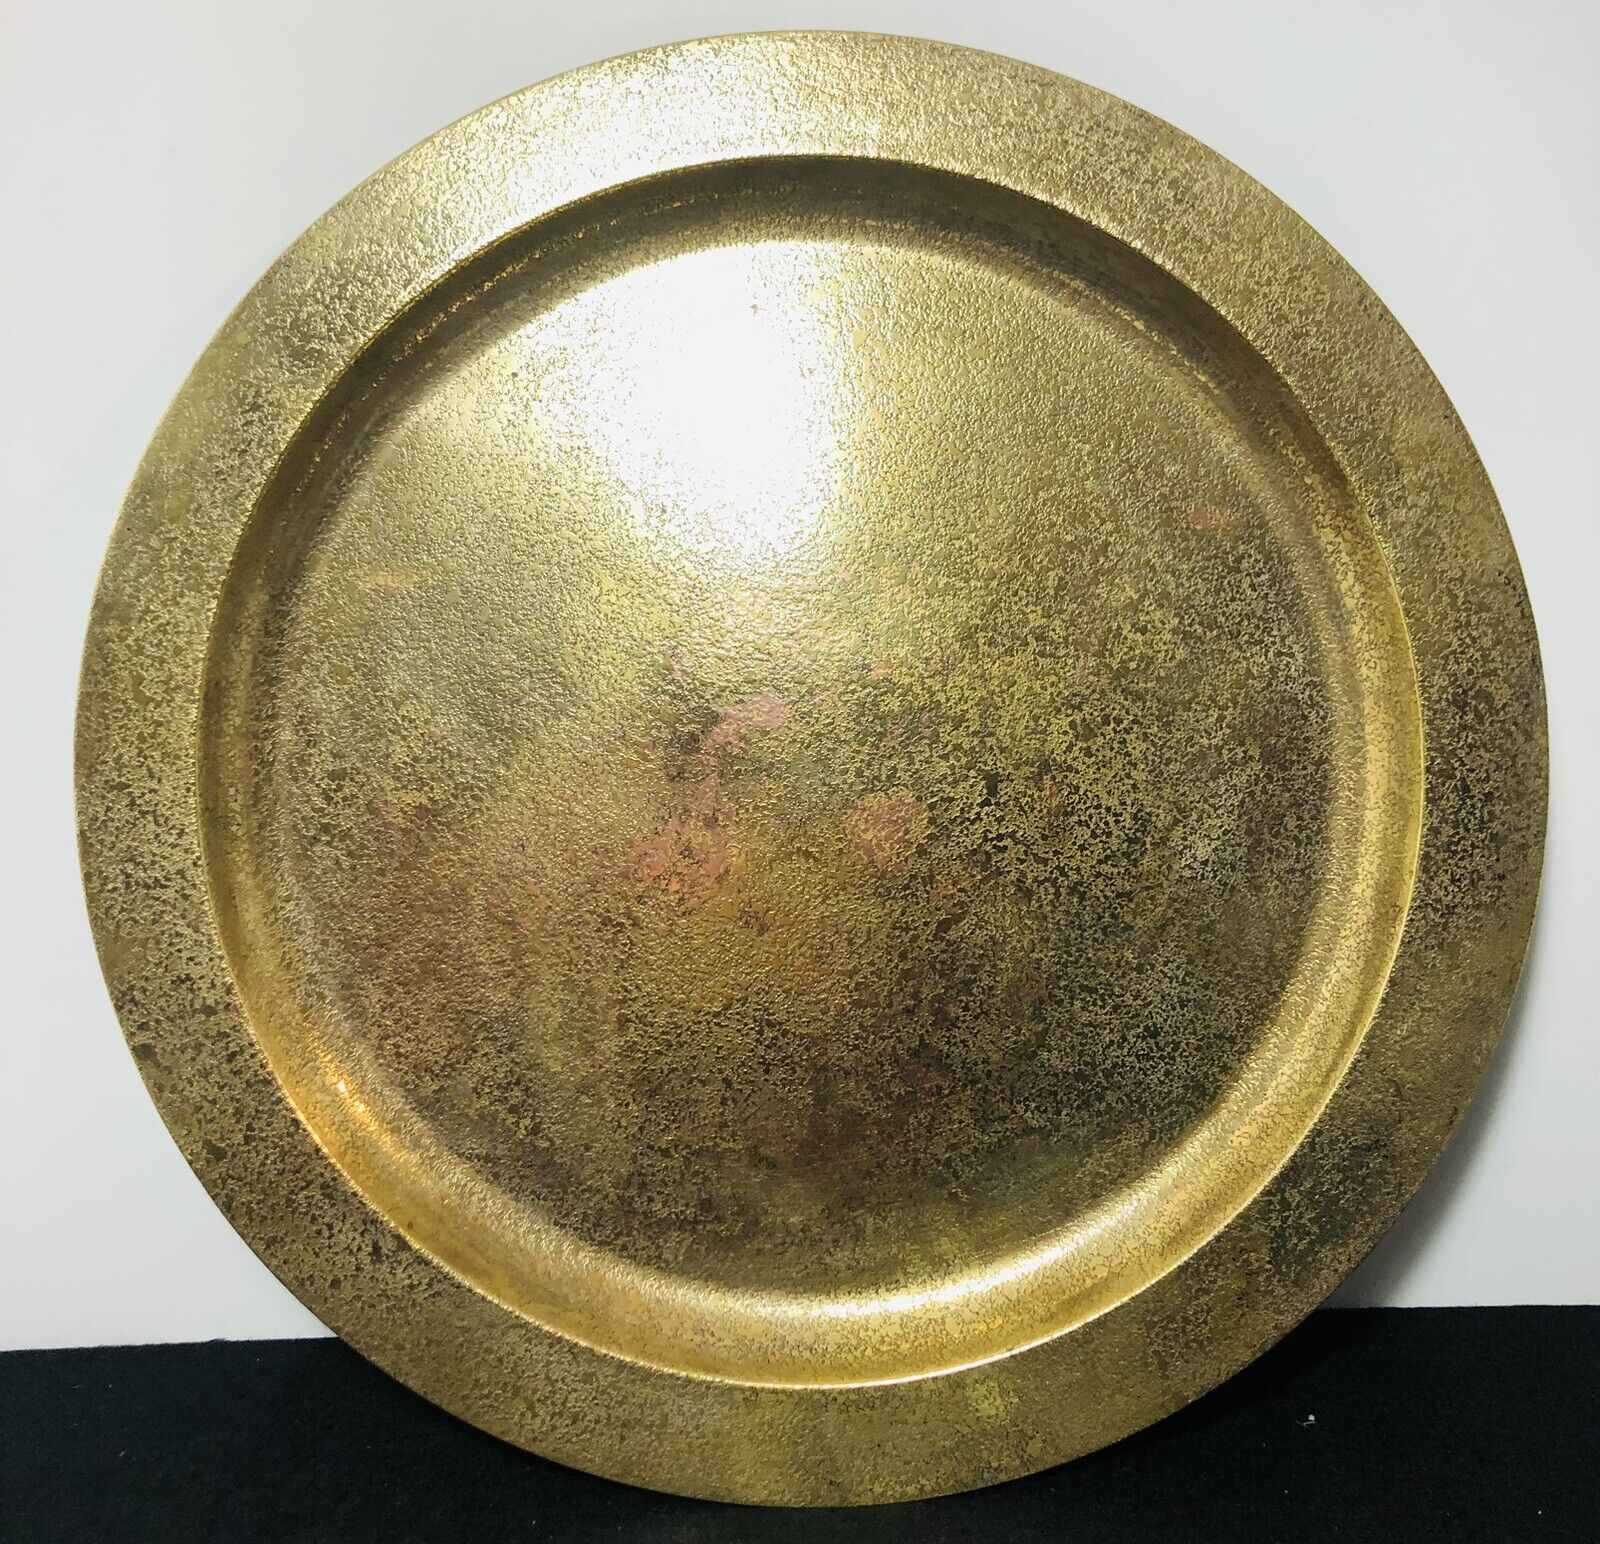 Antique Tiffany Studios Hammered Bronze Tray #1721 c1900 New York Stamped 12”